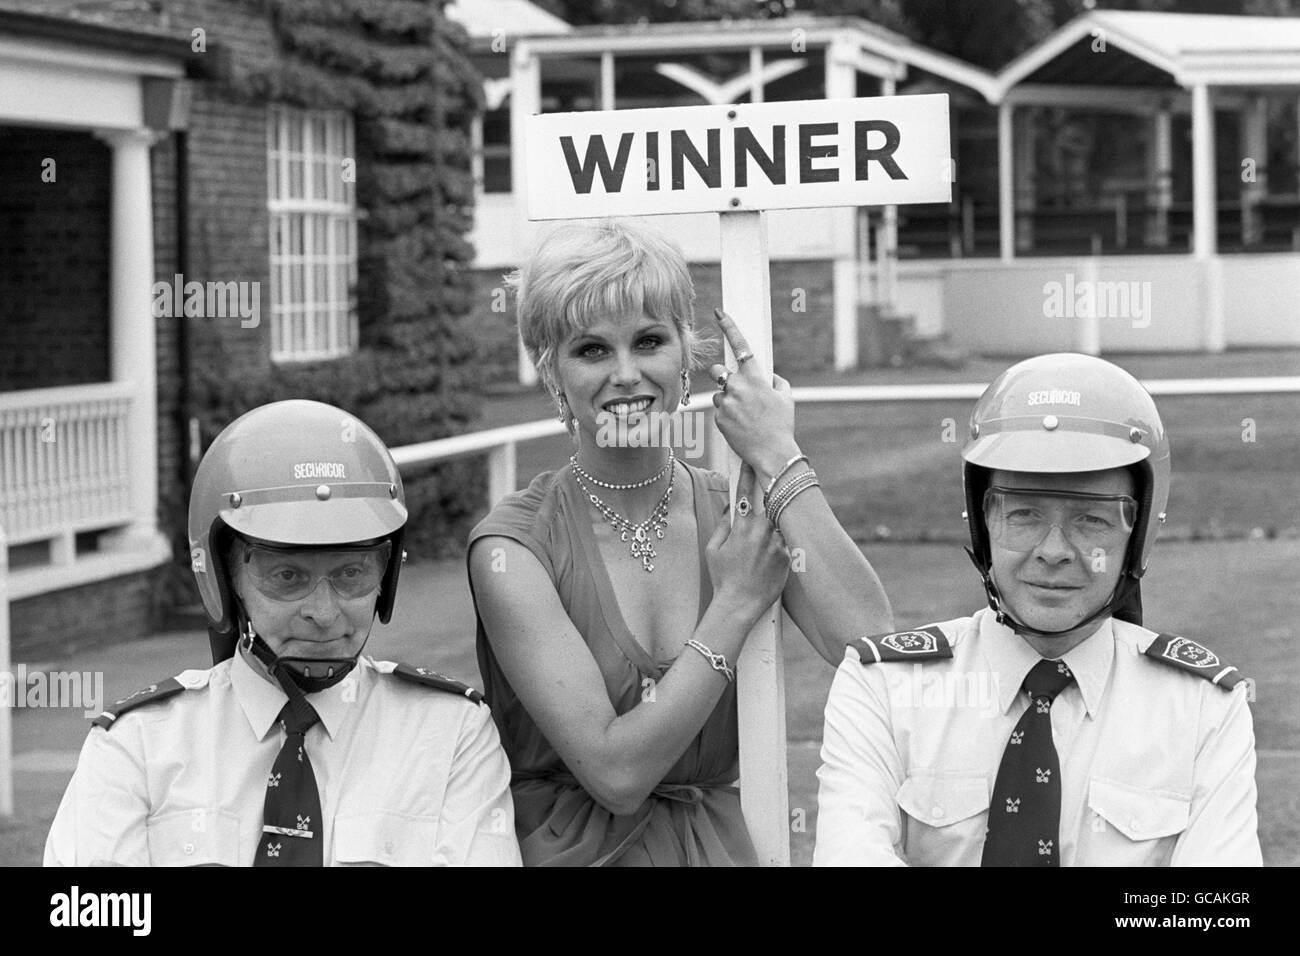 British actress and model Joanna Lumley (of the 'New Avengers' TV series) shows off some of the jewelry from the famous House of Cartier, while two of Cartier's guards protect her. Stock Photo